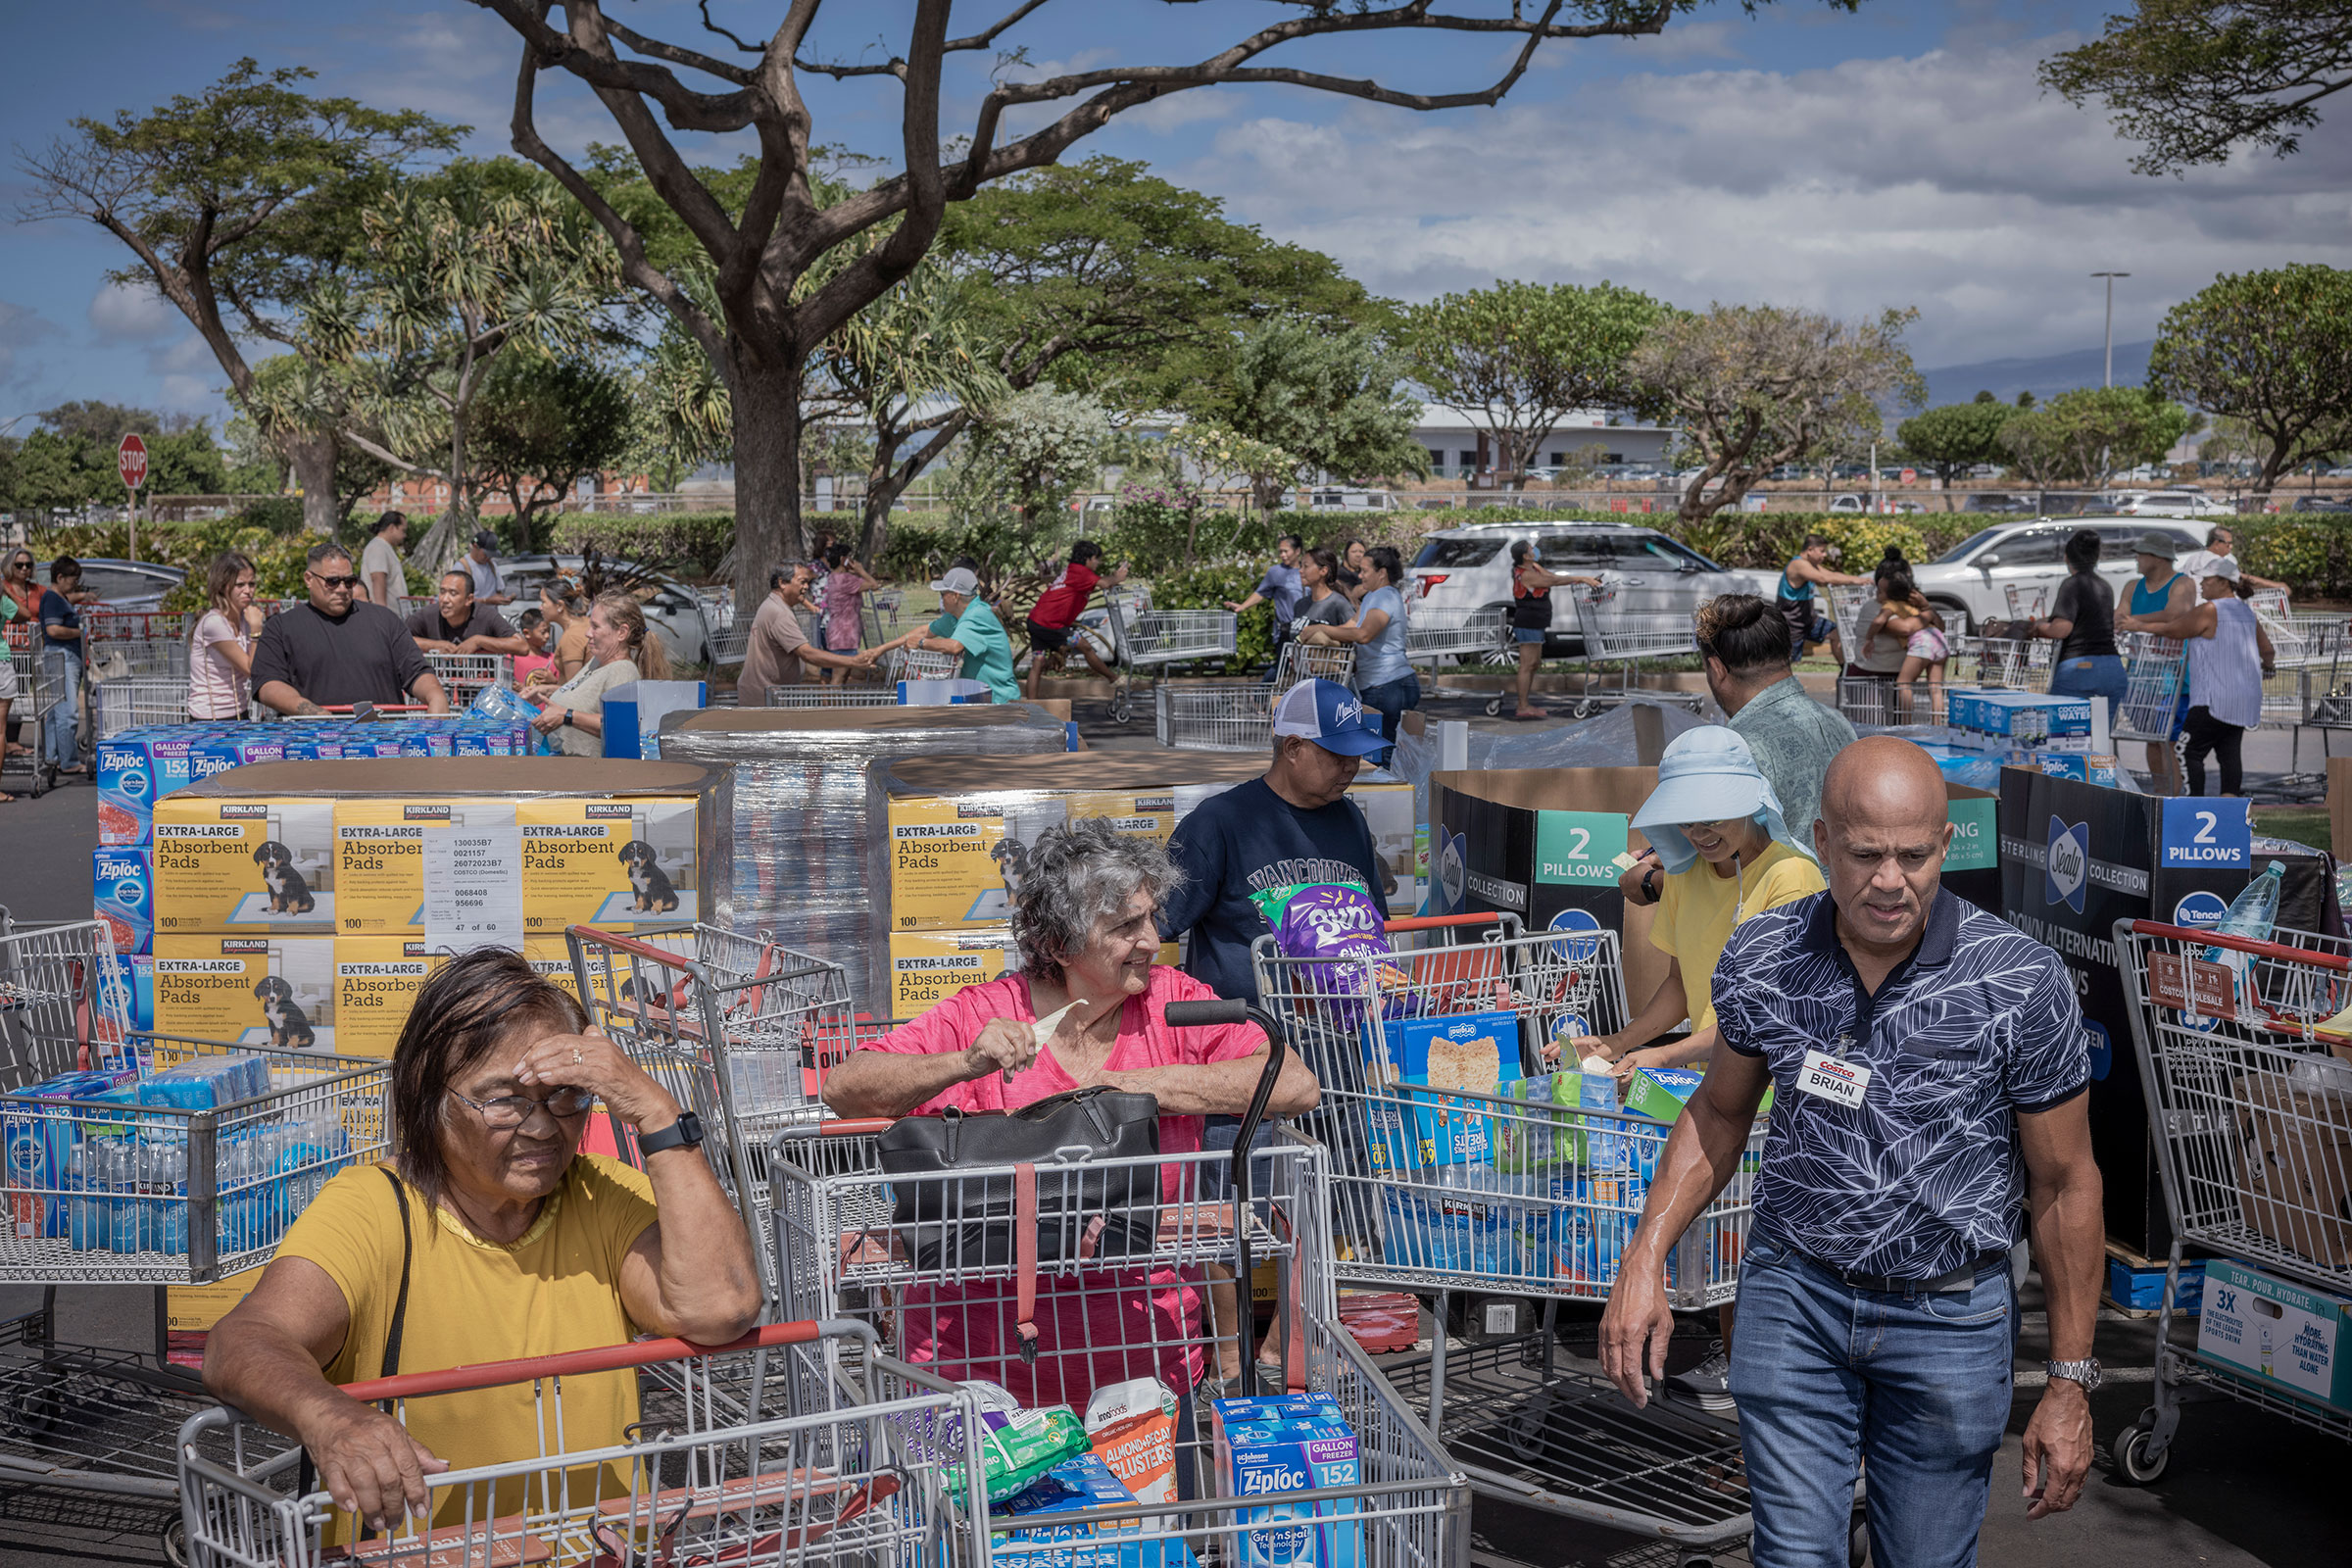 August 14, 2023  Kahului, Hawaii  Maui residents line up to get free supplies at a Costco. The company provided the goods to aid those affected by the deadly fires last week. Photo by David Butow for TIME.